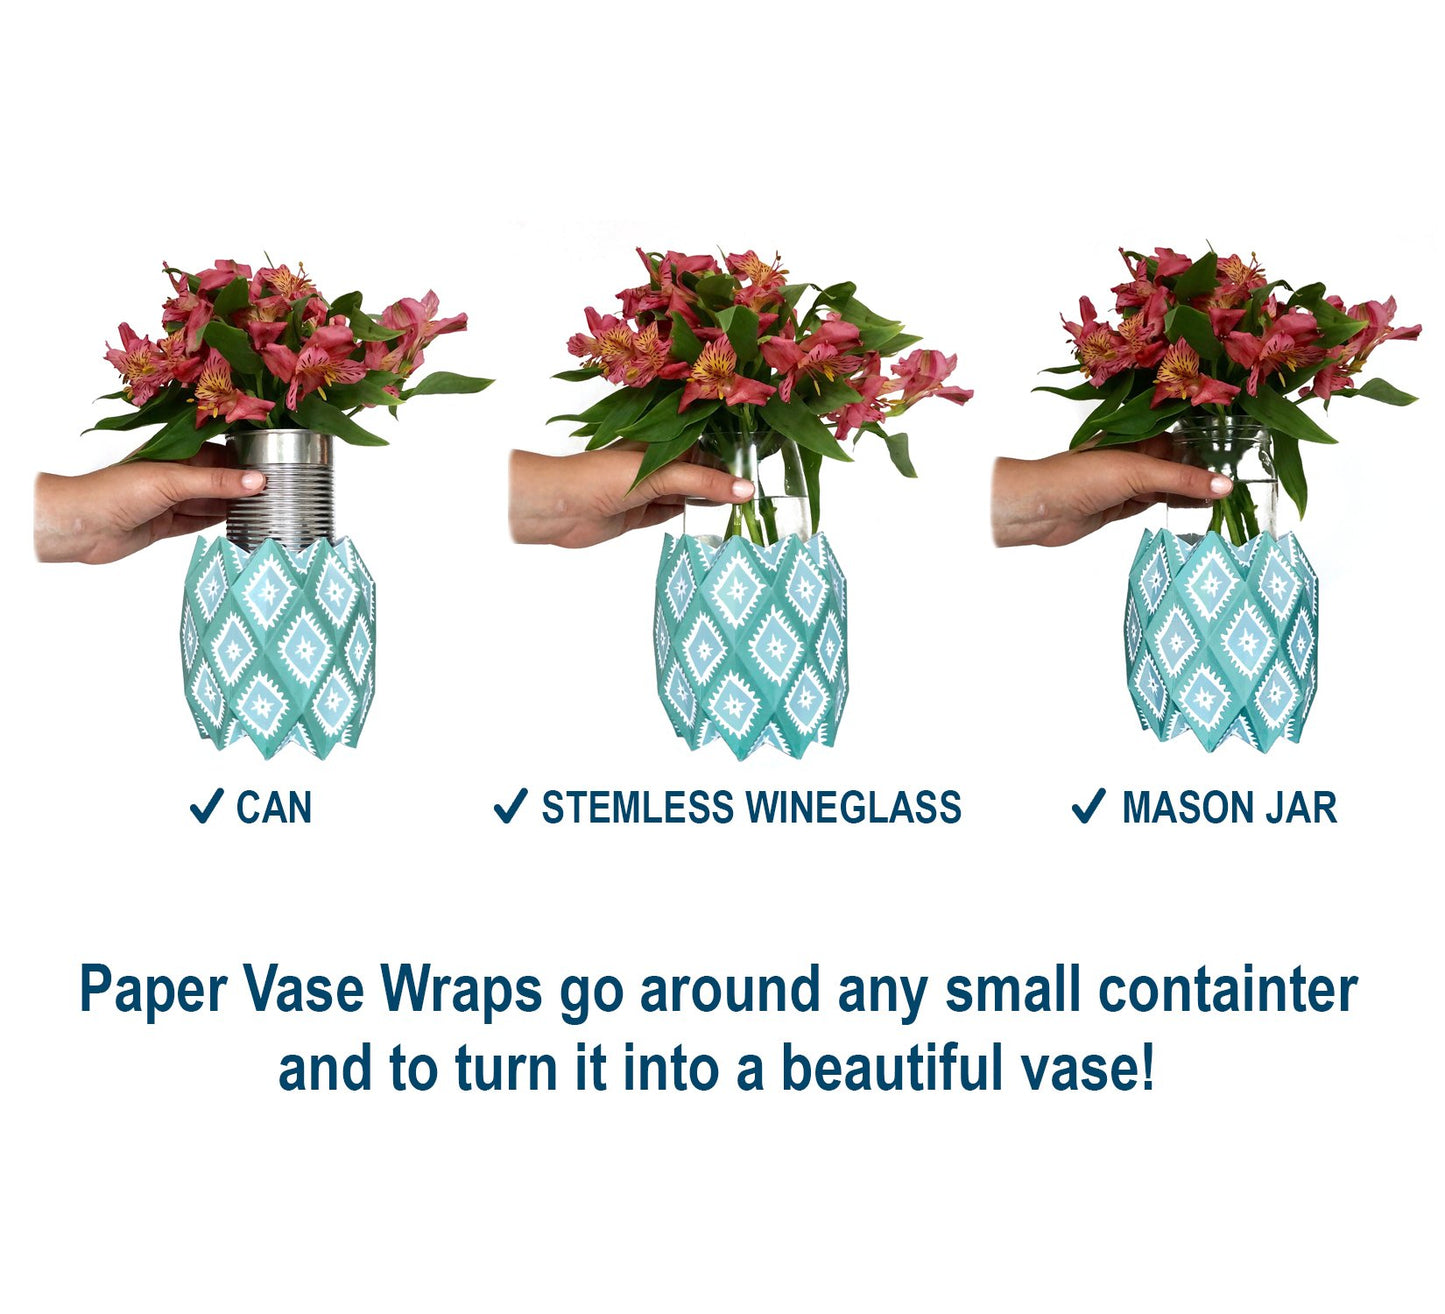 Examples of which small containers paper vase sleeves go around